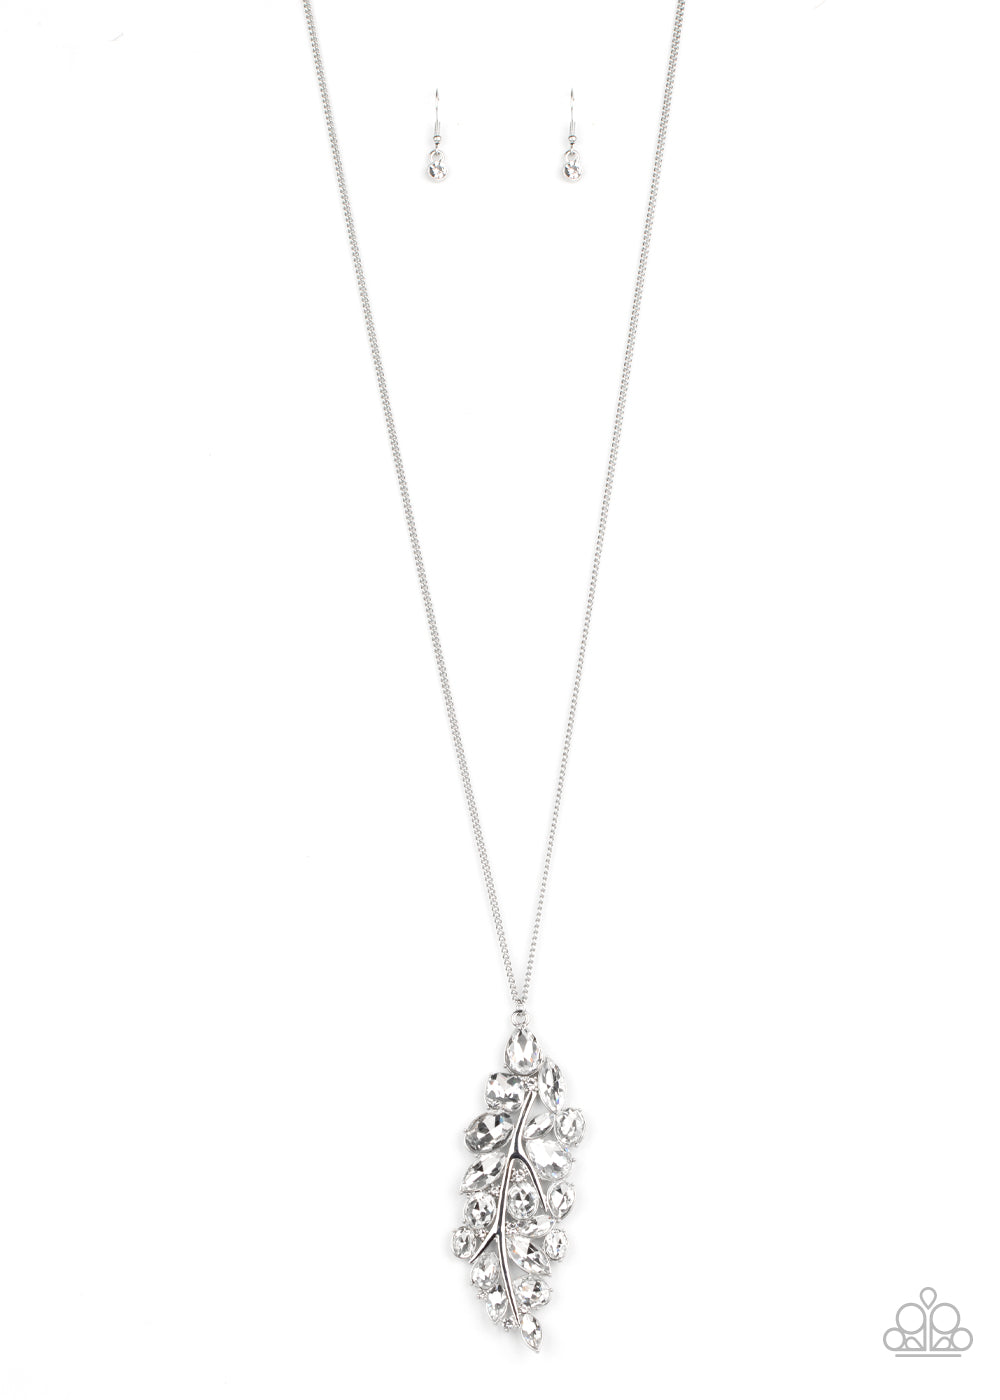 Take a Final BOUGH - White rhinestones necklace (December 2020 Life of the Party)